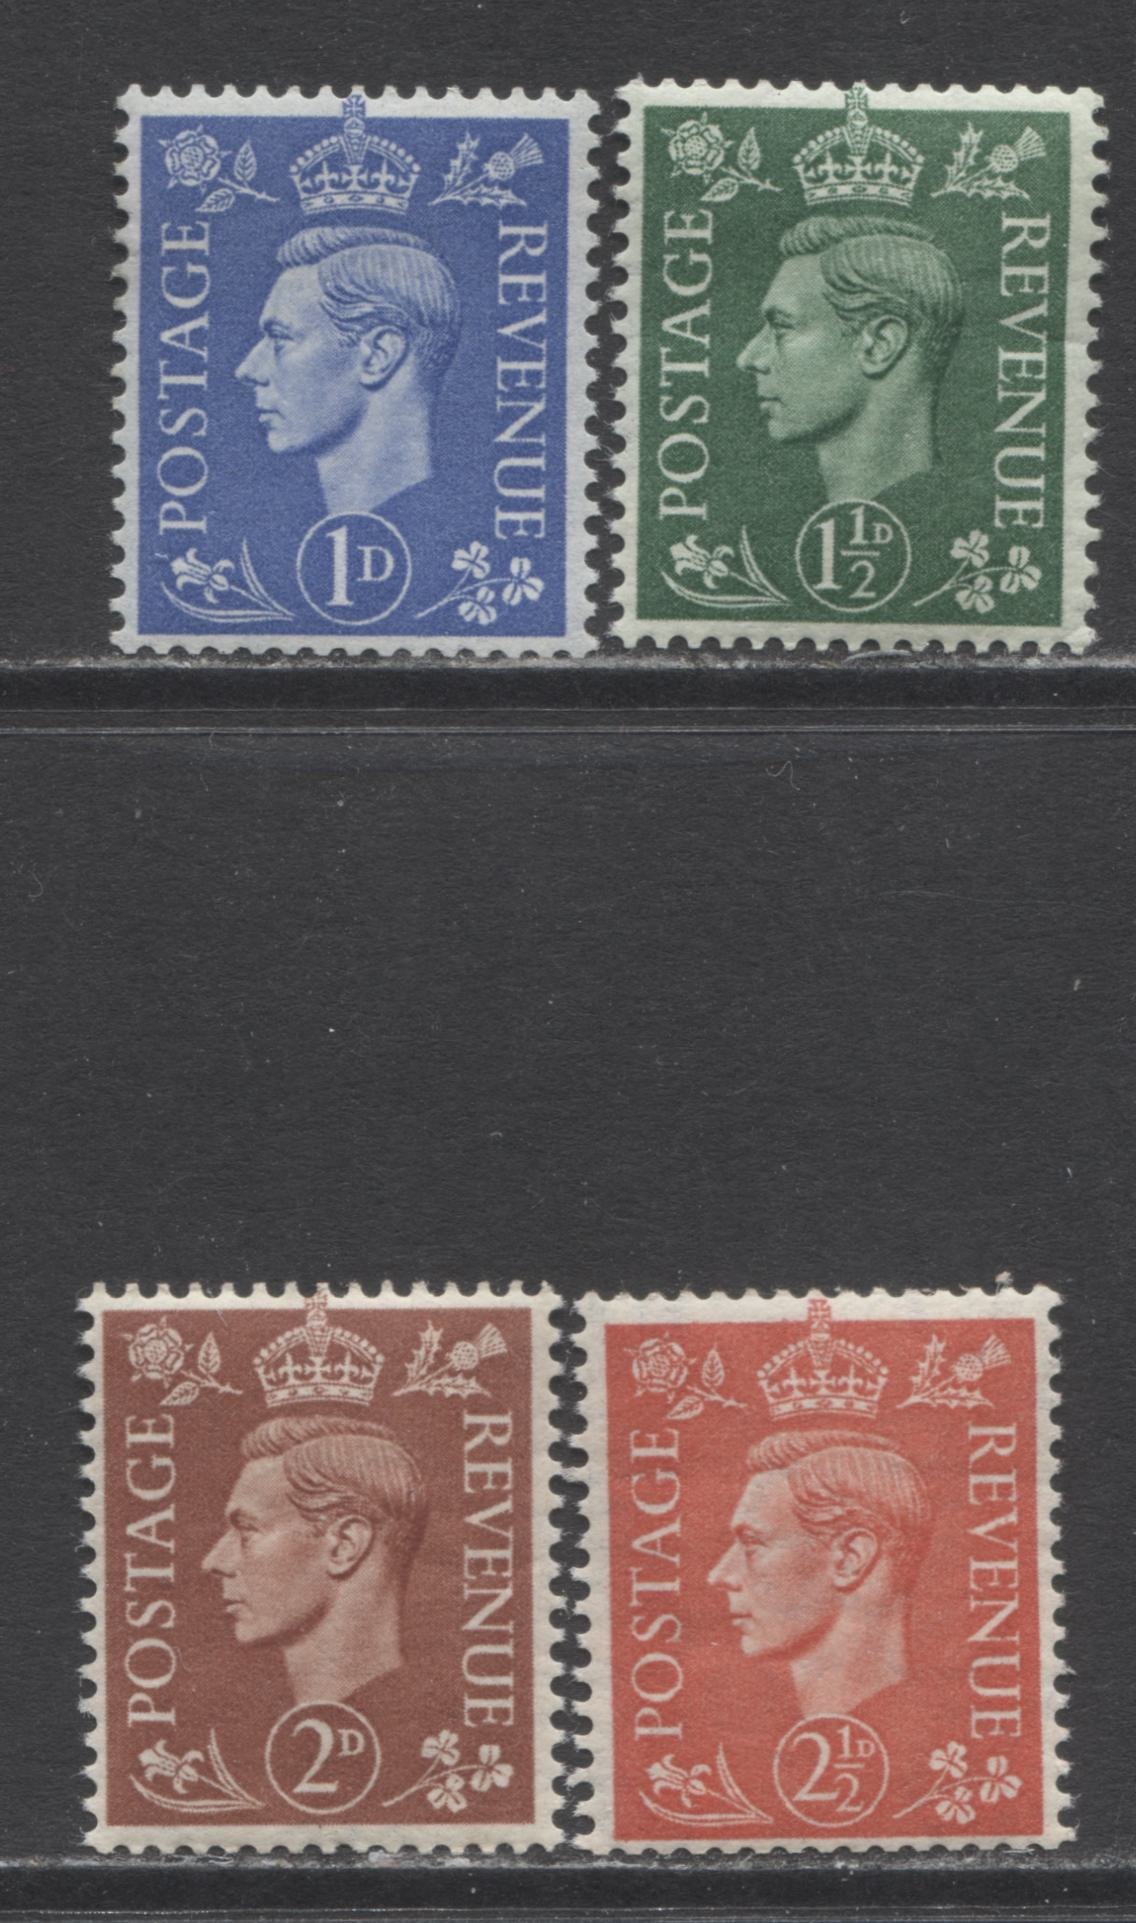 Lot 72 Great Britain SC#281a-284a 1950-1951 King George VI Definitives With Sideways Watermark, A F/VFNH Range Of Singles, 2017 Scott Cat. $3.1 USD, Click on Listing to See ALL Pictures